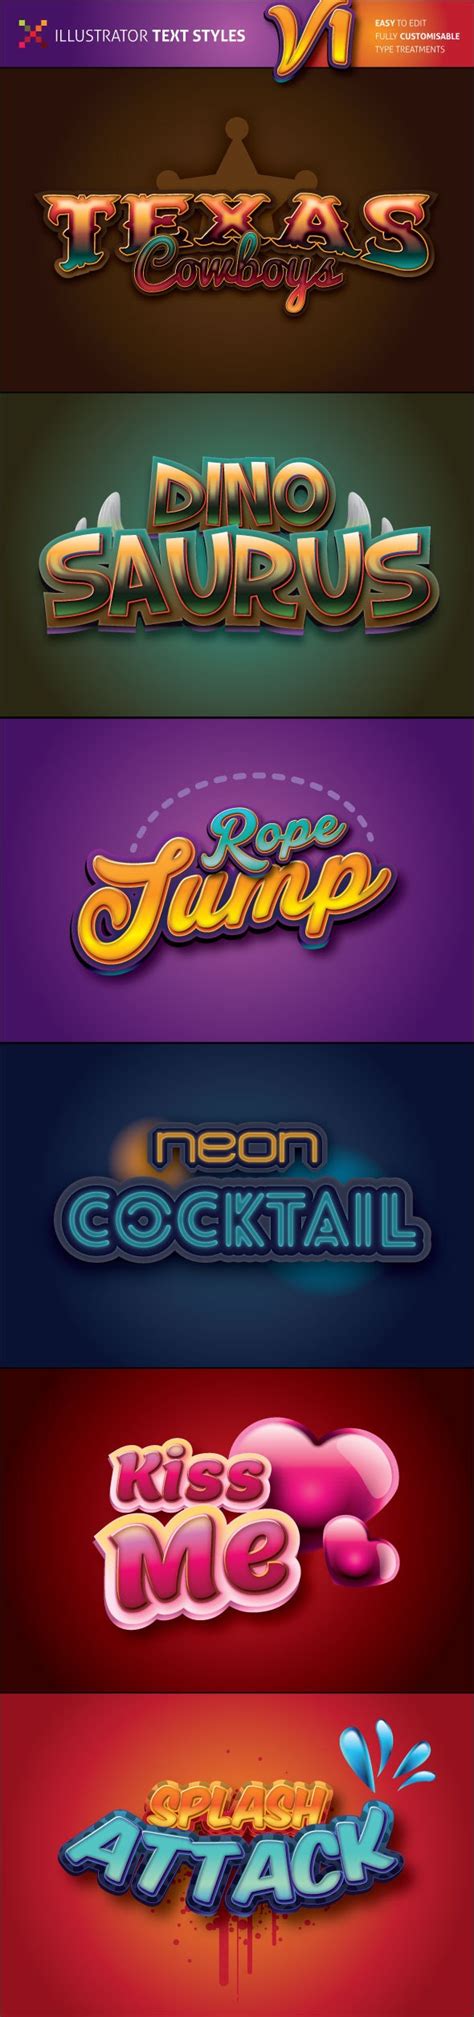 Illustrator Graphic Styles Add Ons Graphicriver